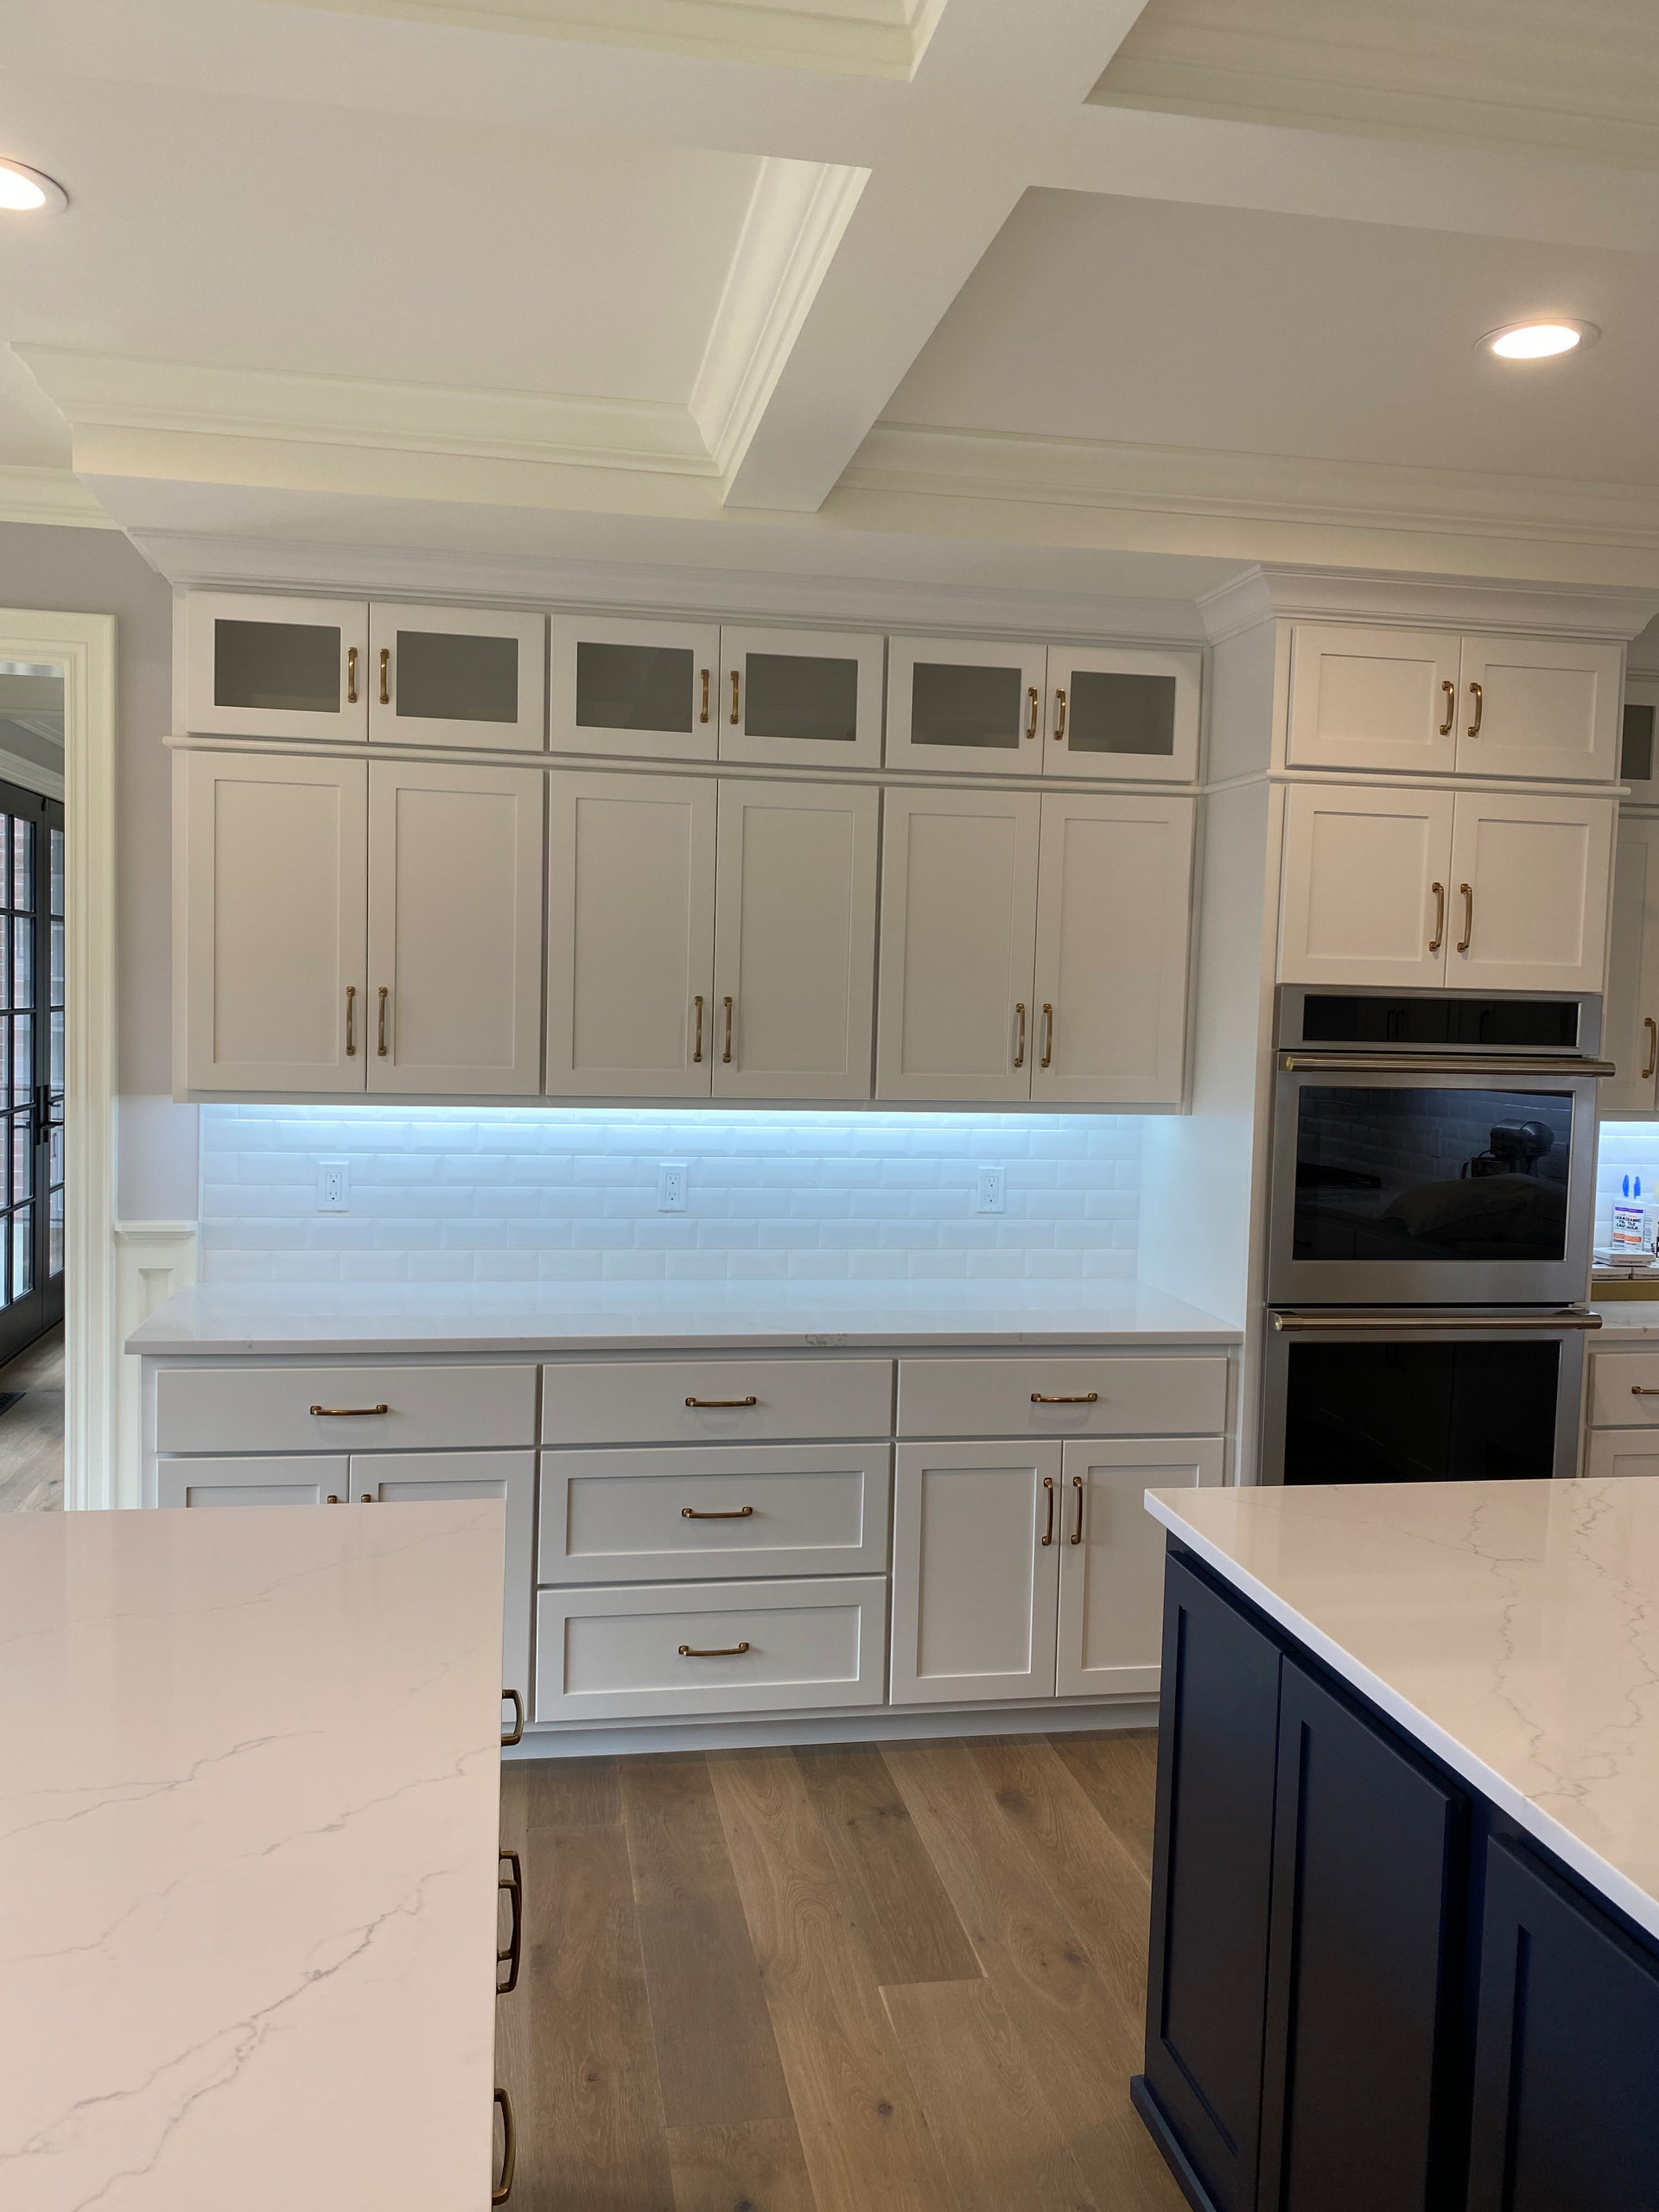 Custom painted kitchen cabinetry with coffered ceiling